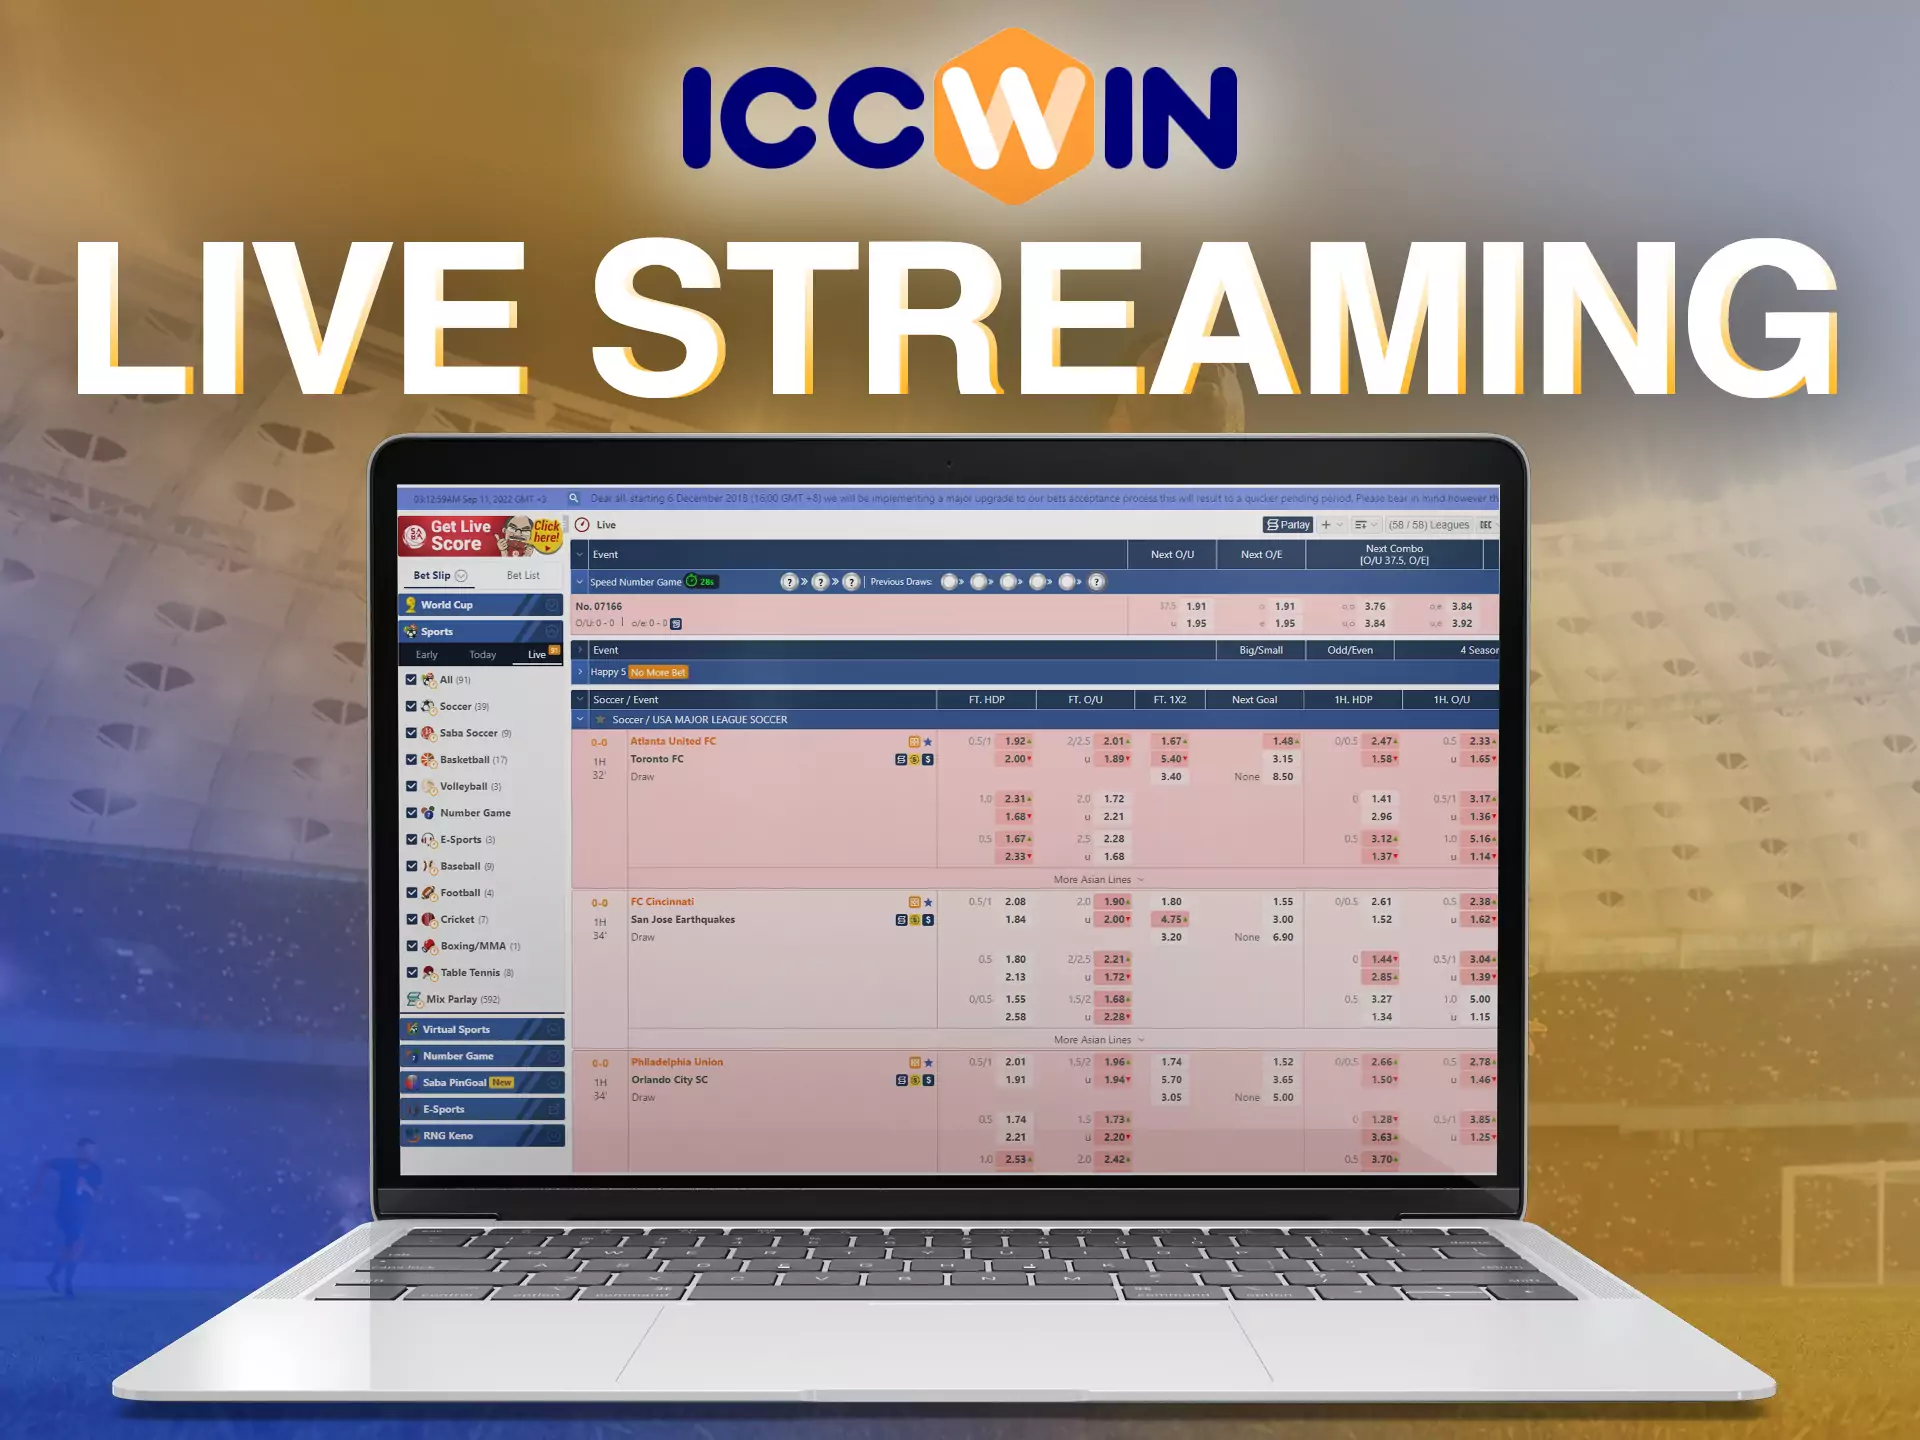 Follow the matches online right on the ICCWin website.